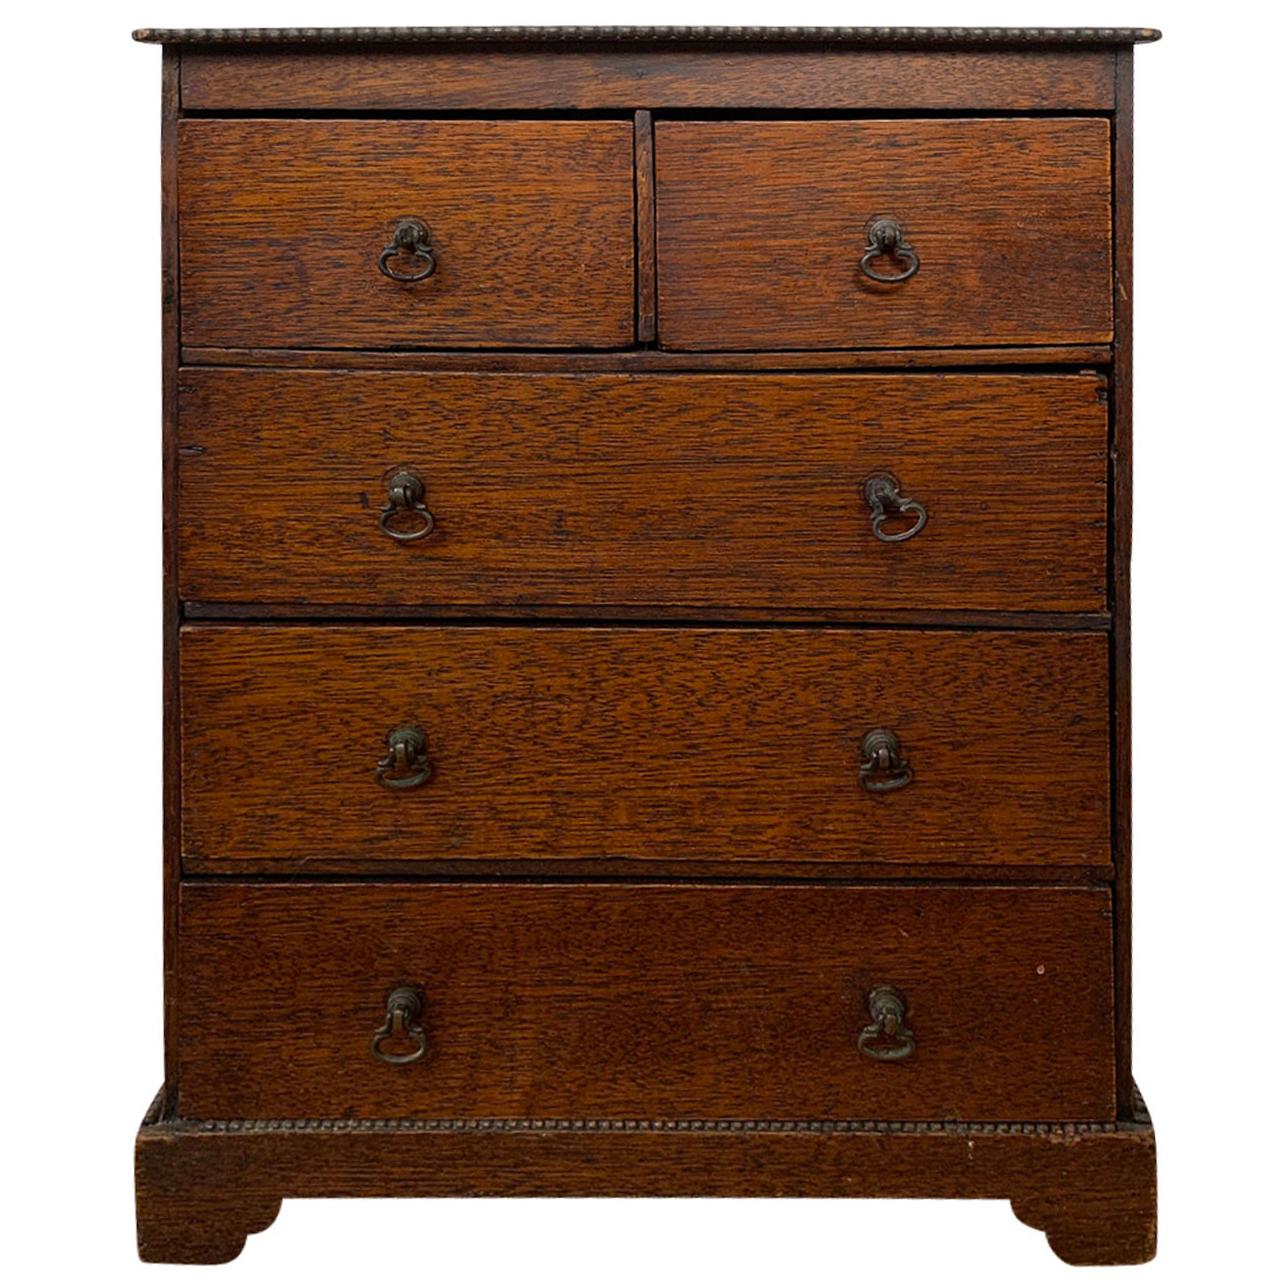 19th Century Miniature American Oak Chest with Five Drawers